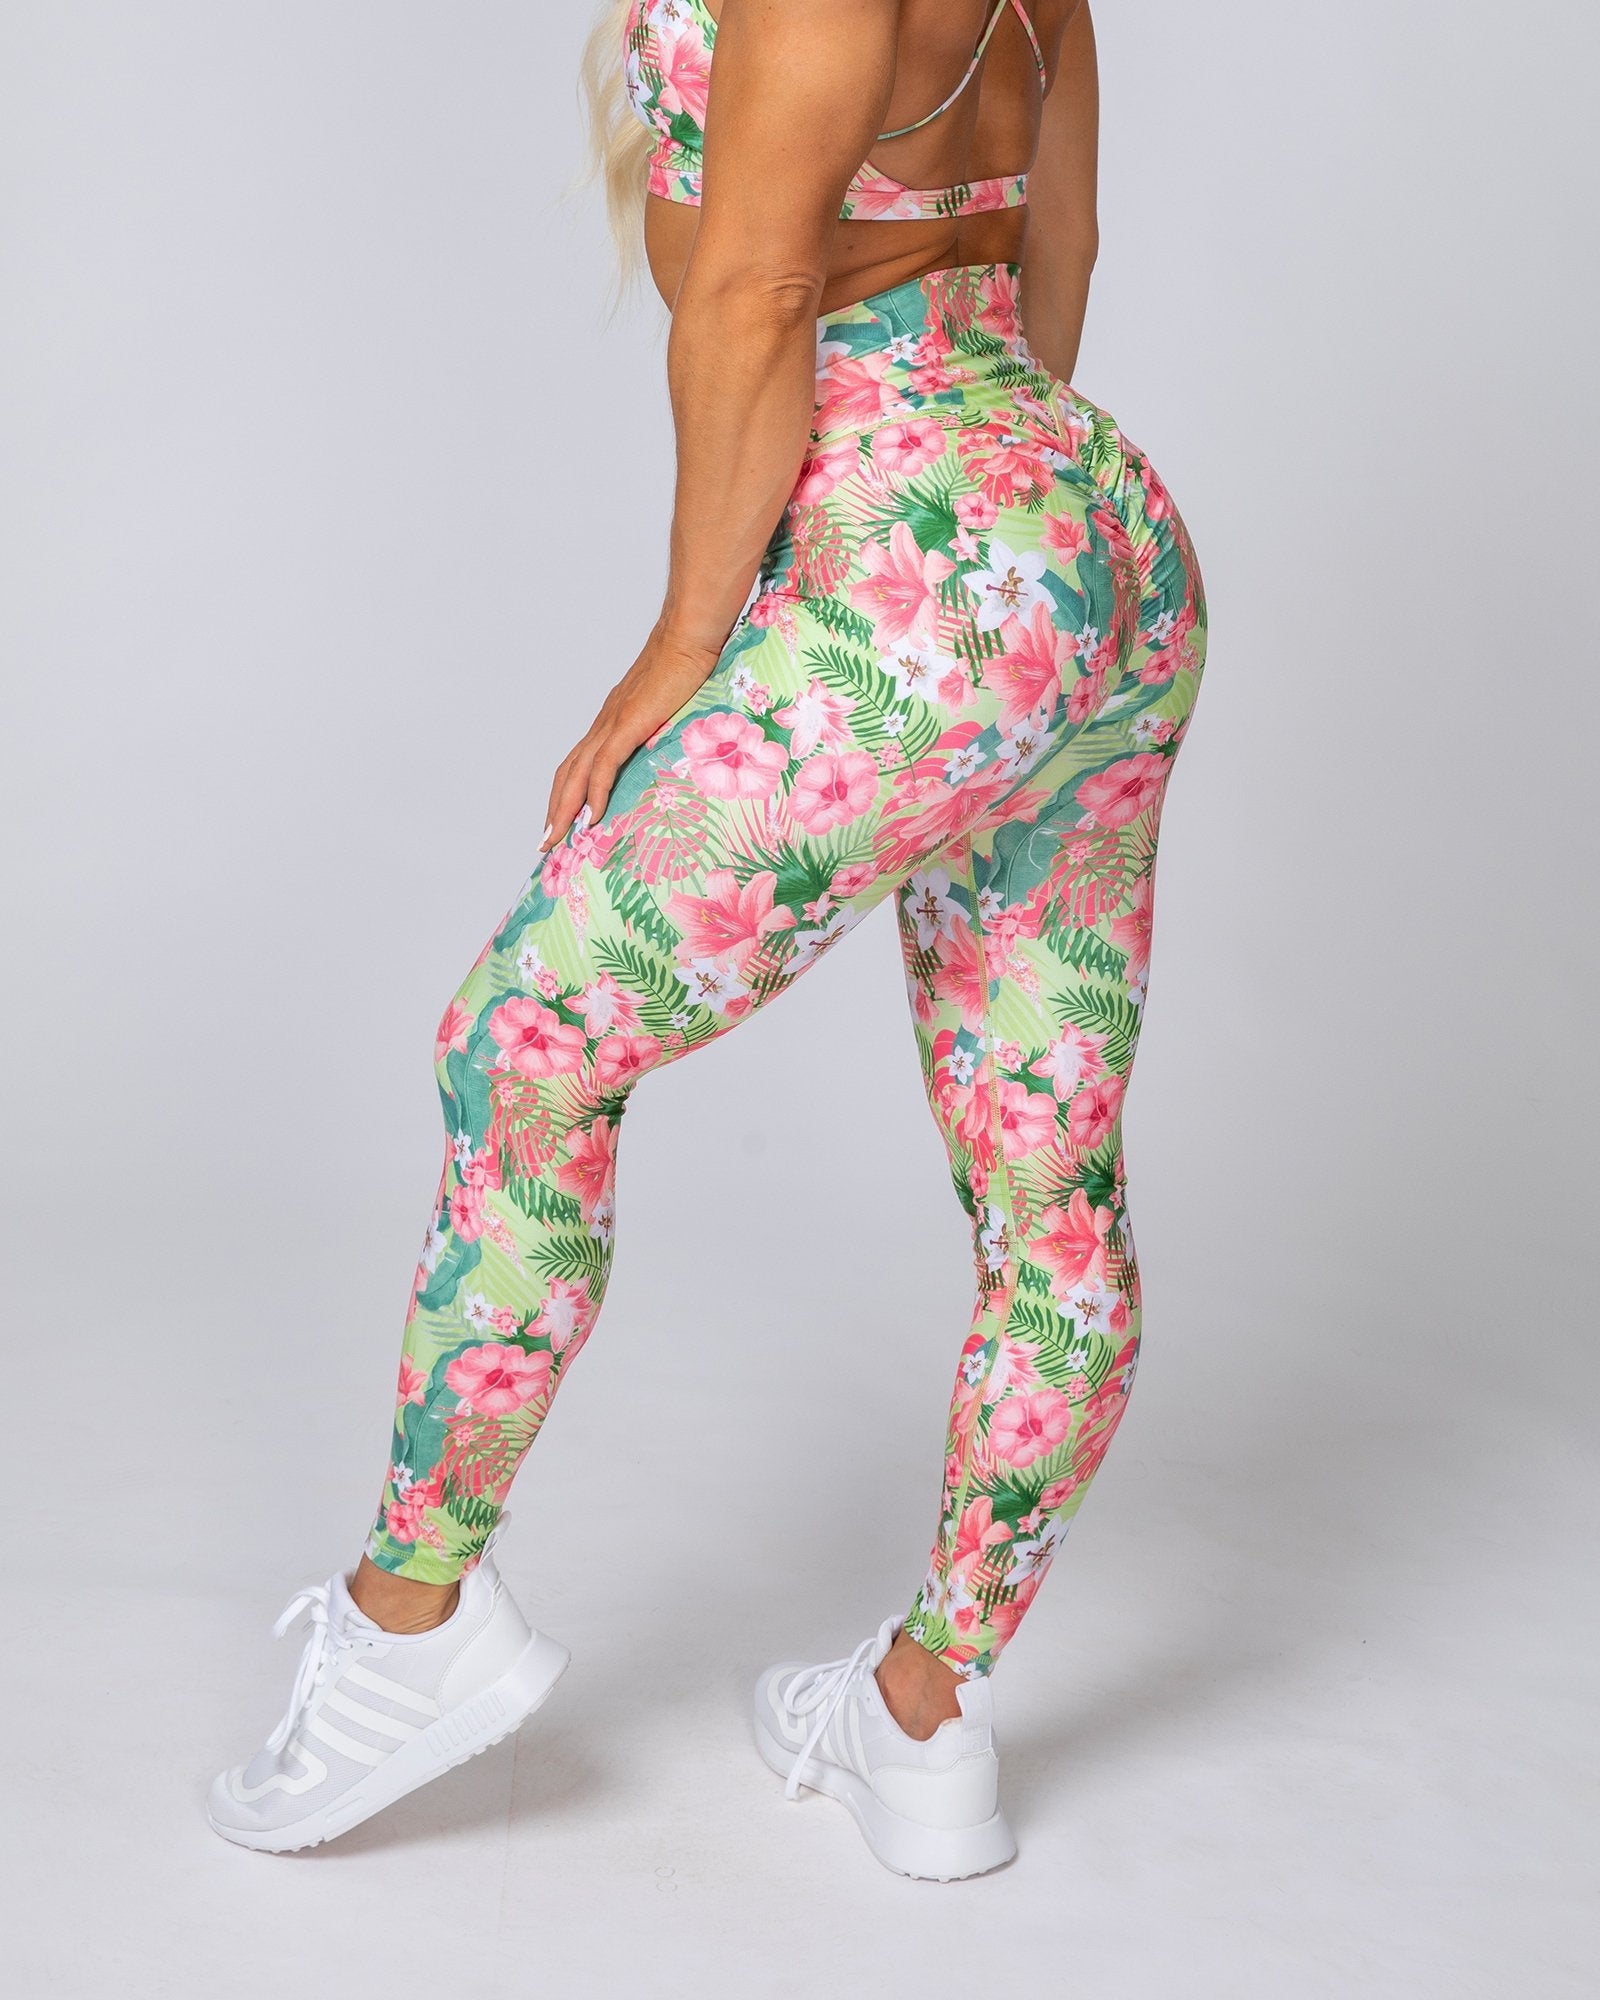 Buy the Cutest Floral Workout Leggings Activewear to Show Your Style -  Jenny at dapperhouse